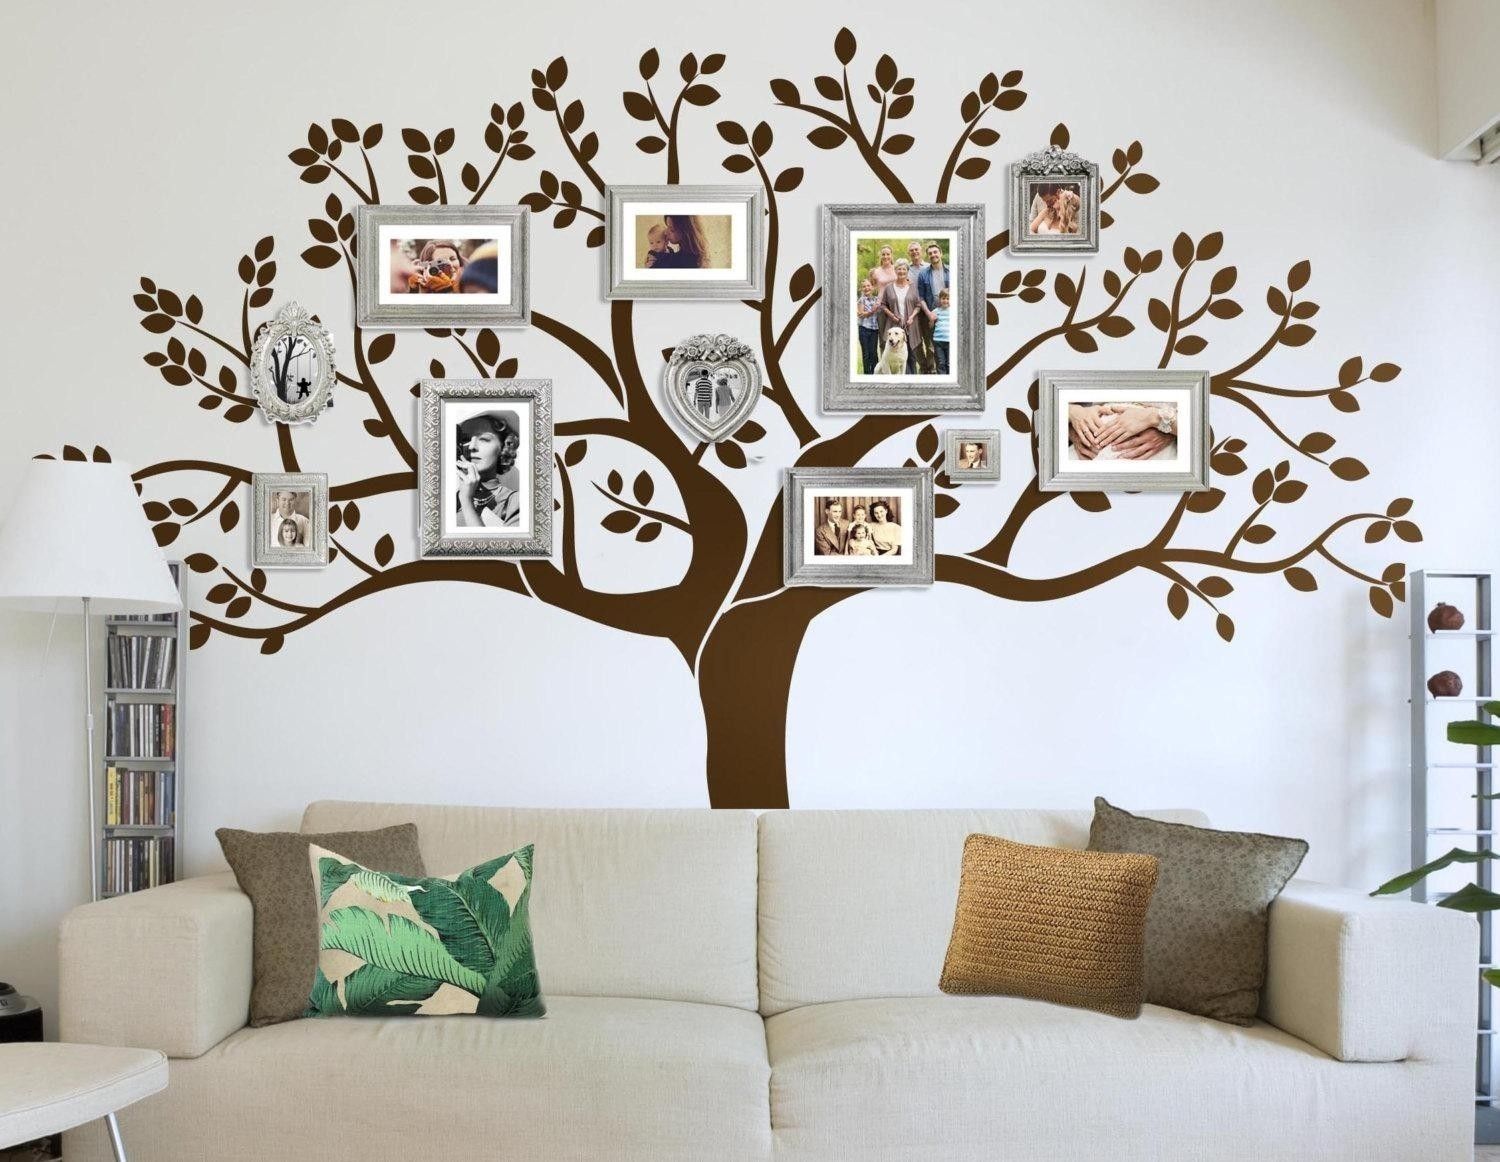 Marvelous Family Wall Art Picture Of Metal Tree Decor Trend And Within Wall Tree Art (View 13 of 20)